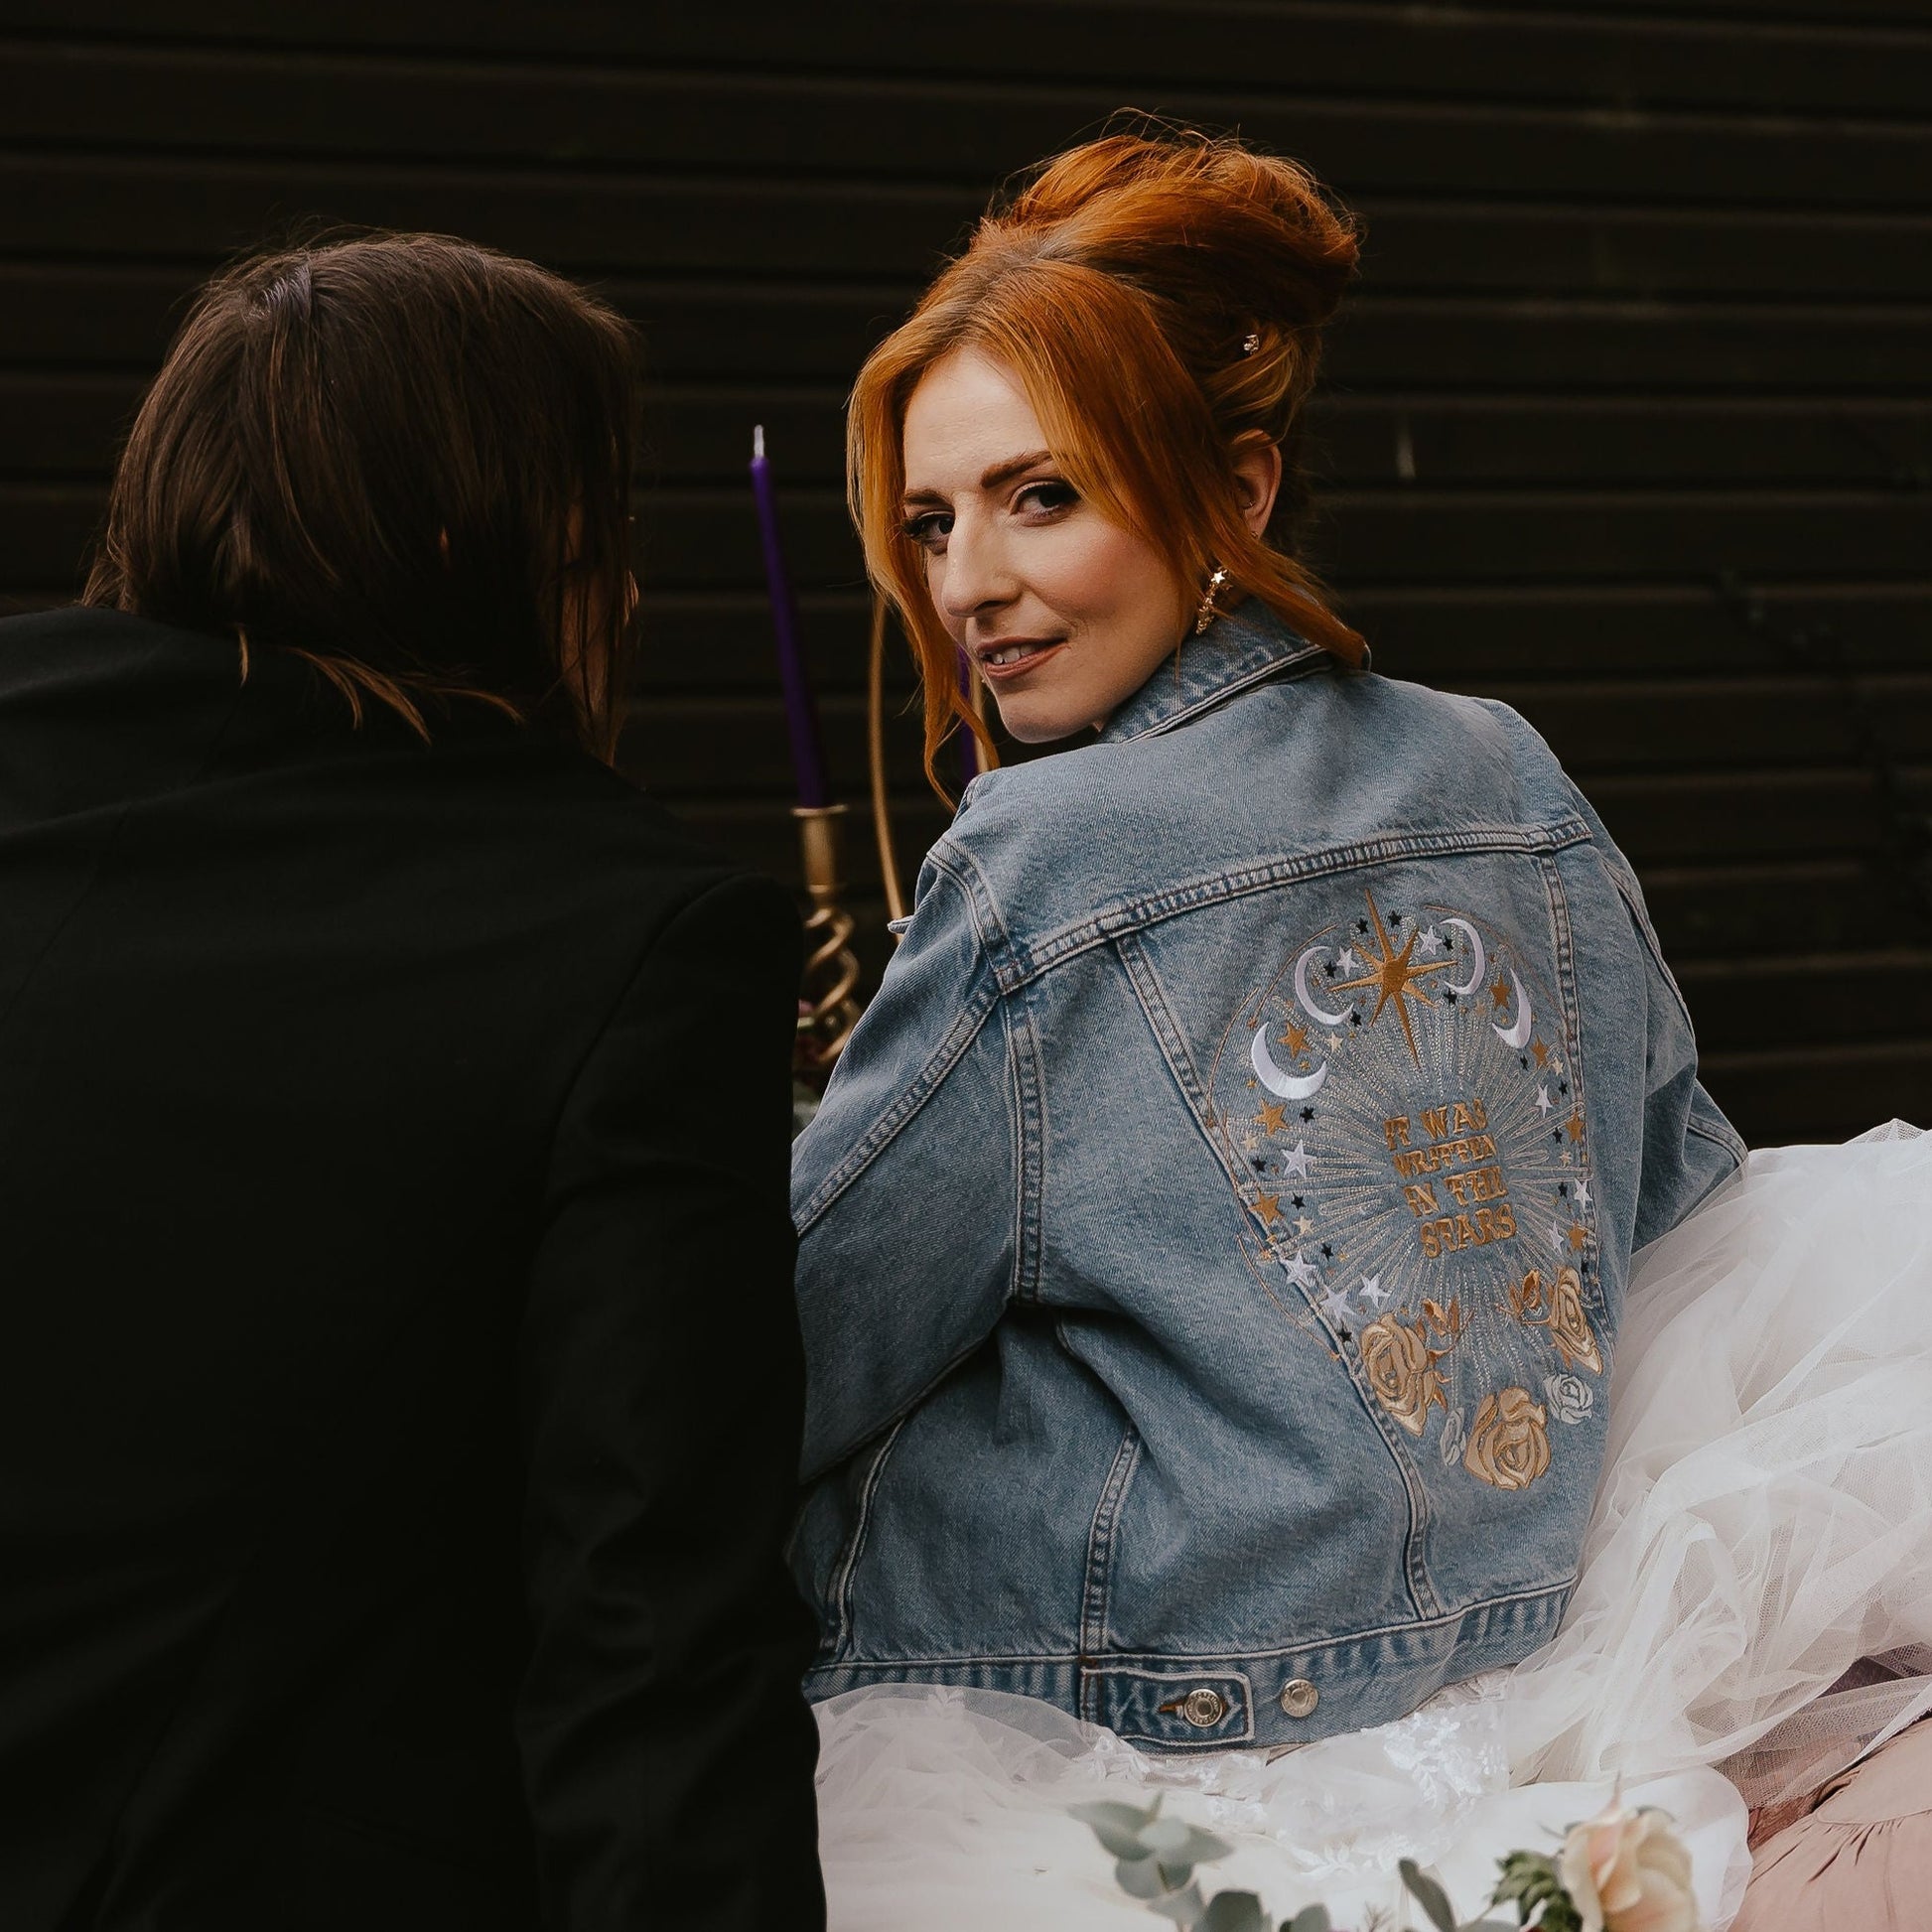 Elegant Denim Wedding Jacket: Complete your bridal attire with this 'Written in the Stars' denim cover-up, offering a unique and sophisticated touch with delicate ecru embroidery